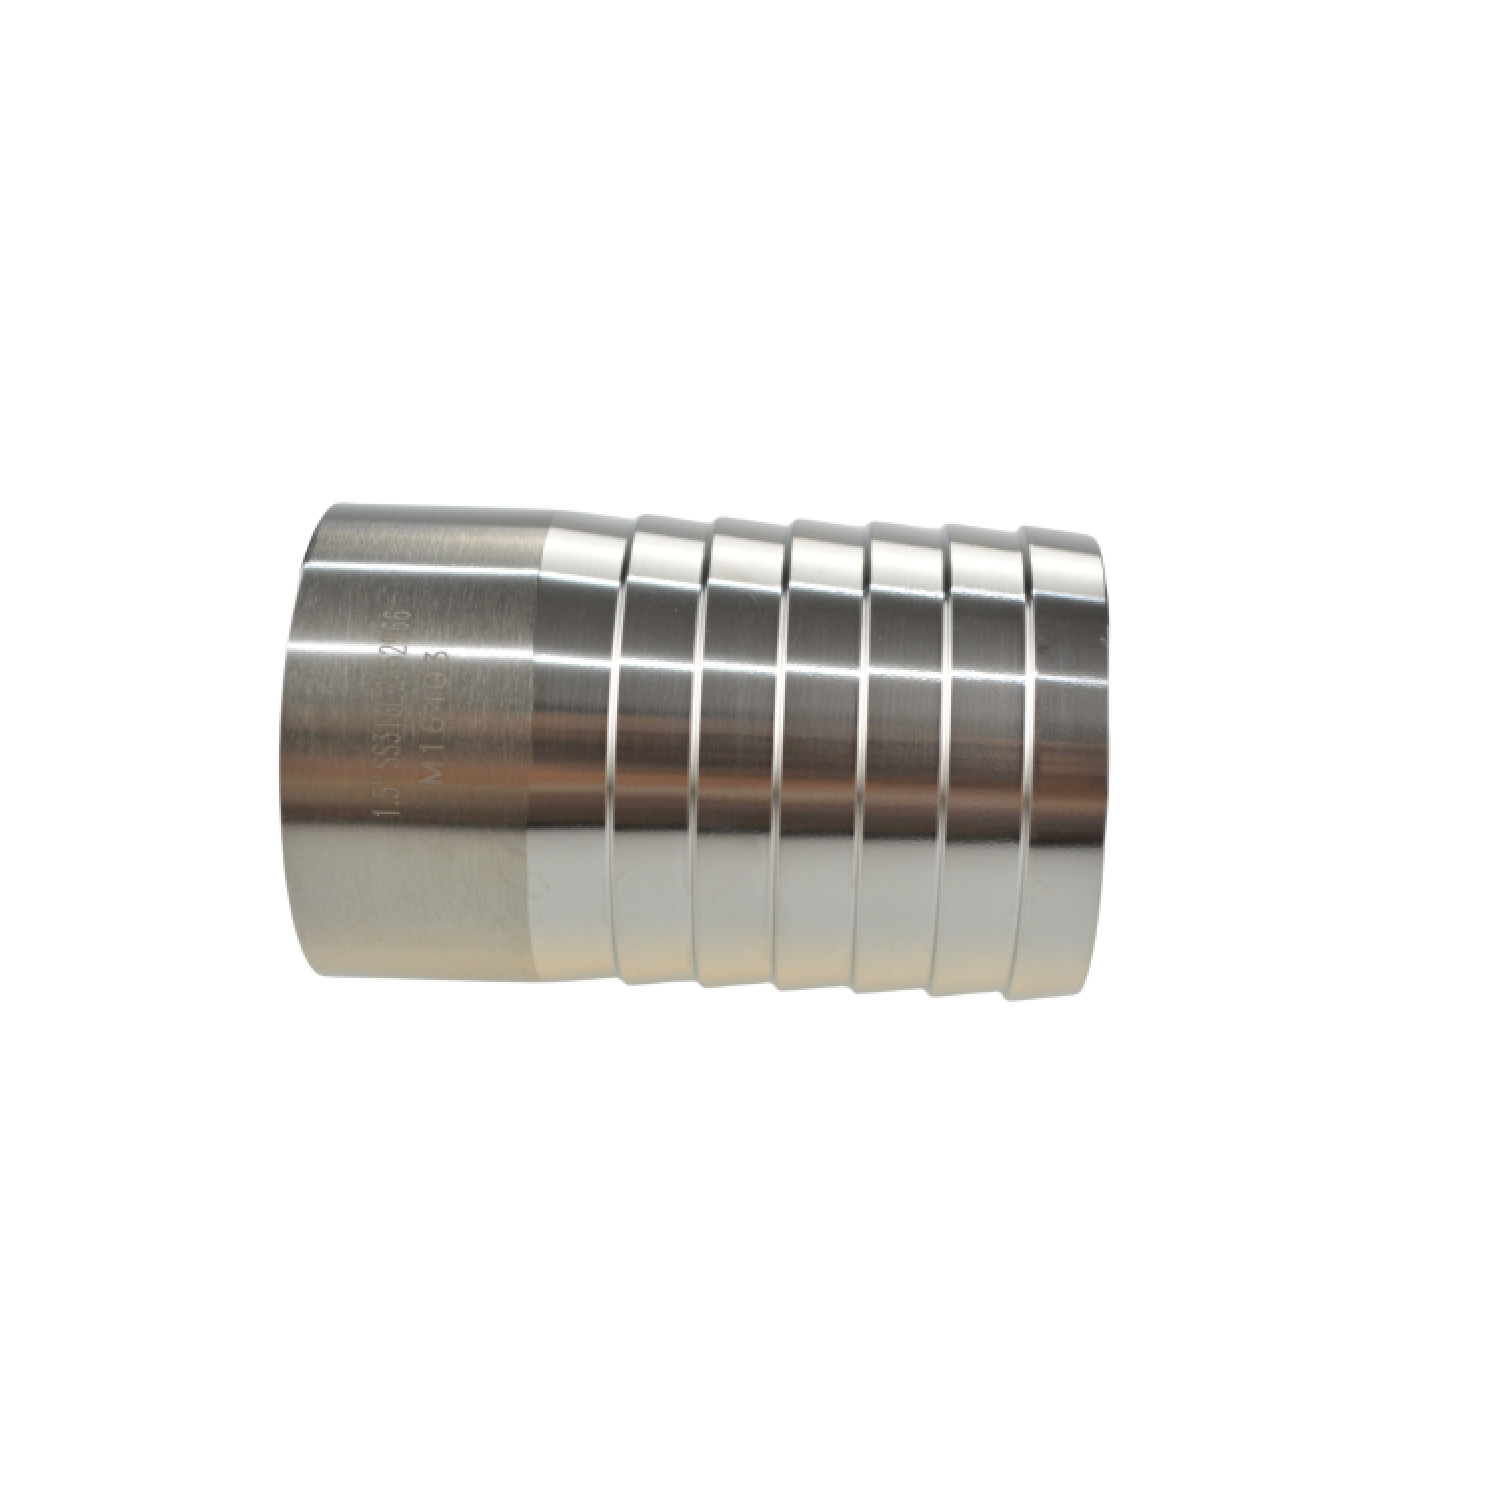 Stainless Steel SS316L Sanitary Grade High Pressure 14MPHR.14WHR JN-FL 23 2004 Welded/ Clamp Hose Adapter